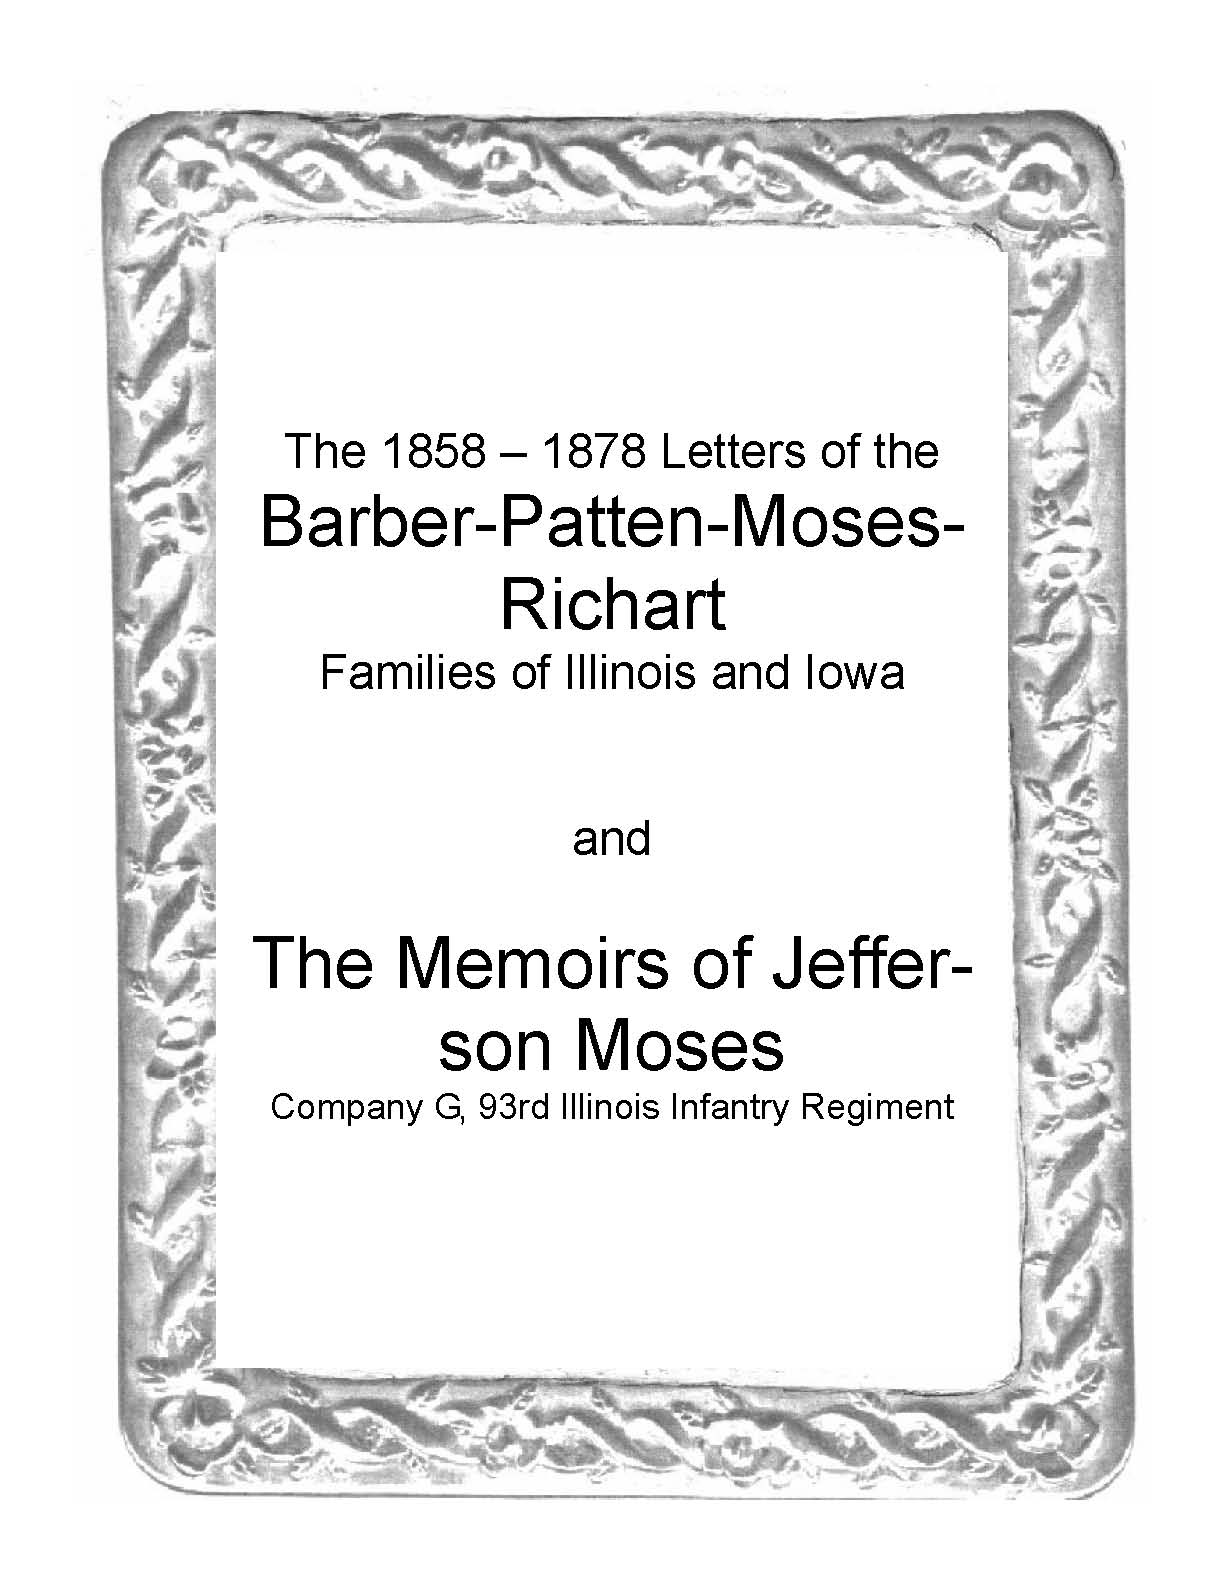 Cover%20of%20Patten-Barber-Moses-Richart%20Cover.jpg